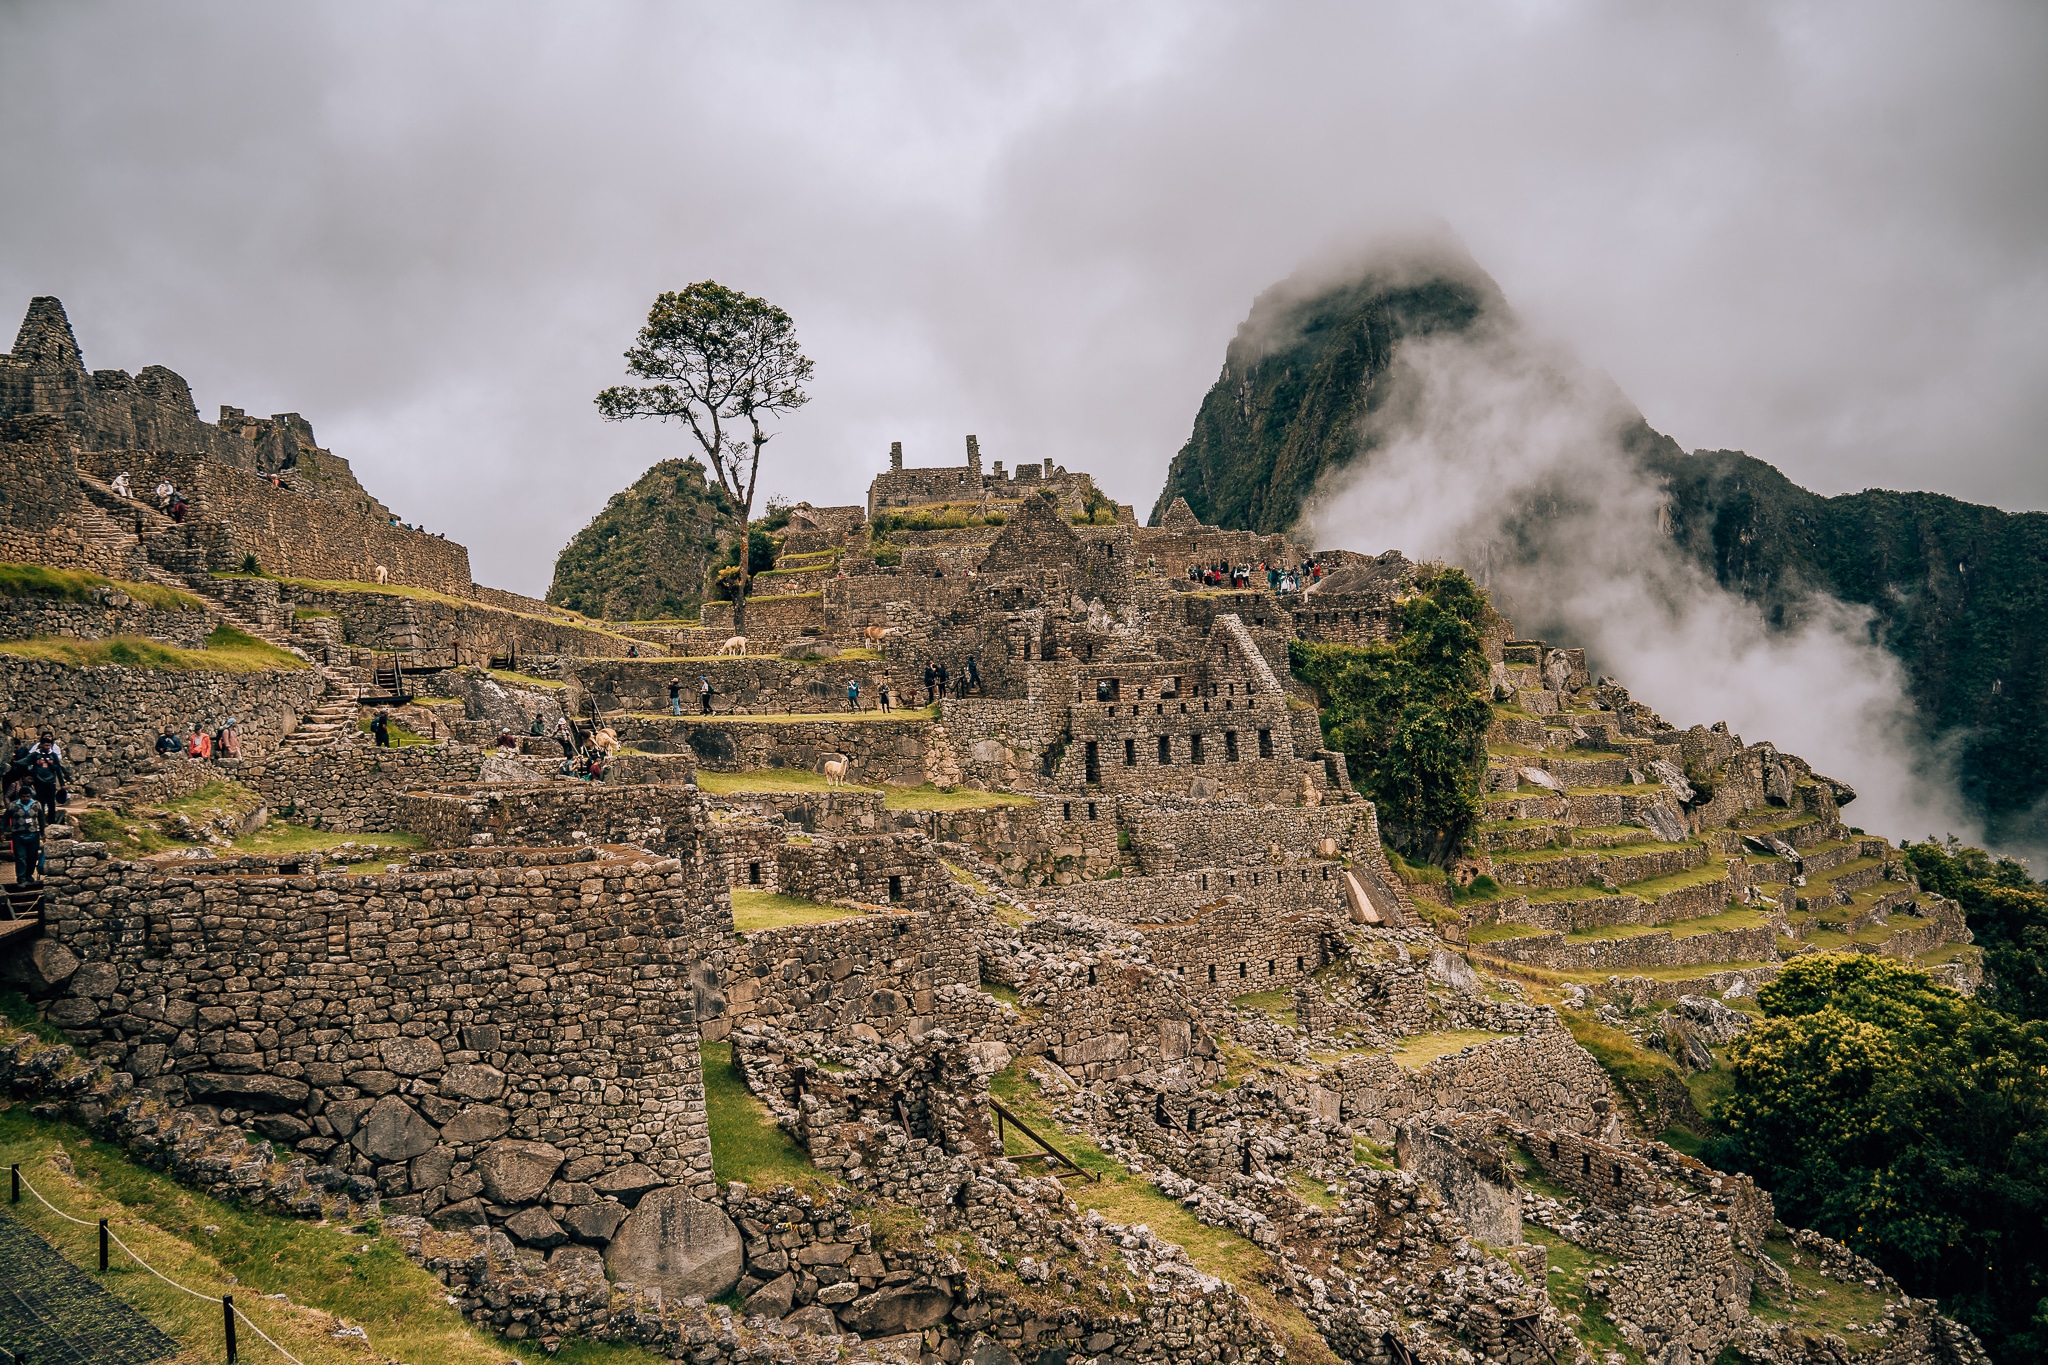 Picture of the citadel of Machu Picchu with a cloud covering part of the mountains in the background